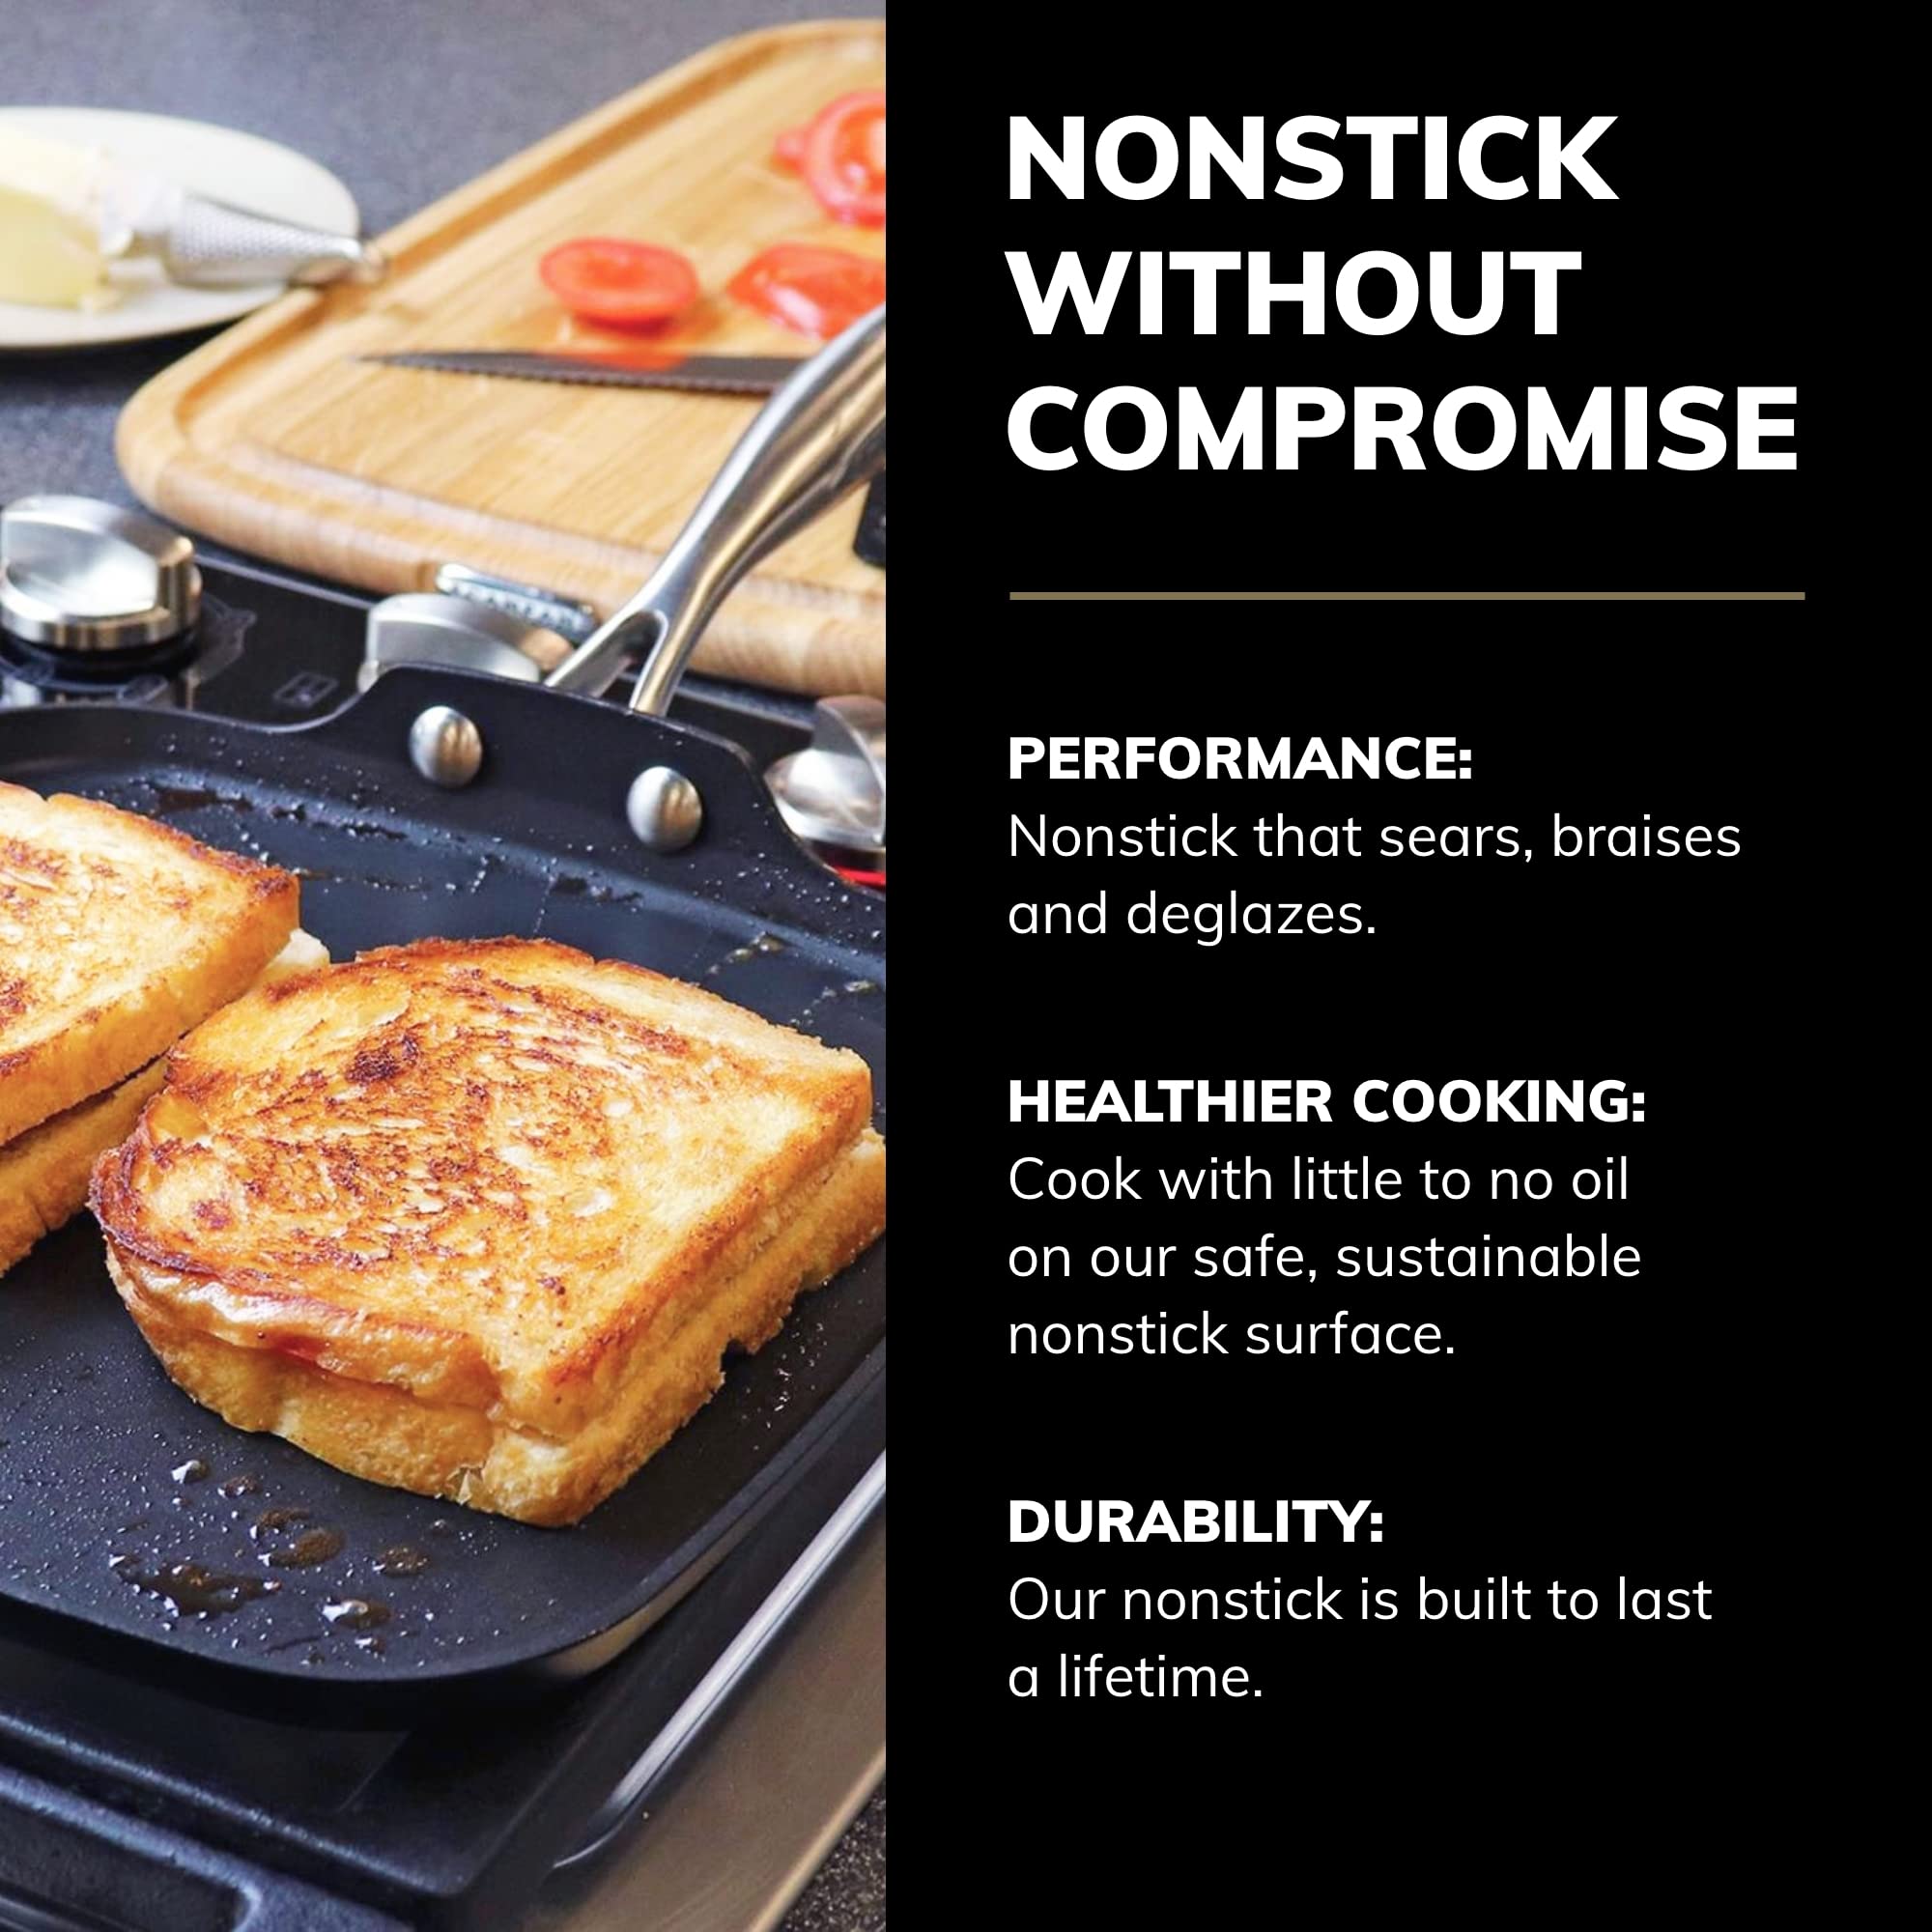 SCANPAN Professional 11” Griddle Pan - Easy-to-Use Nonstick Cookware - Dishwasher, Metal Utensil & Oven Safe - Made in Denmark